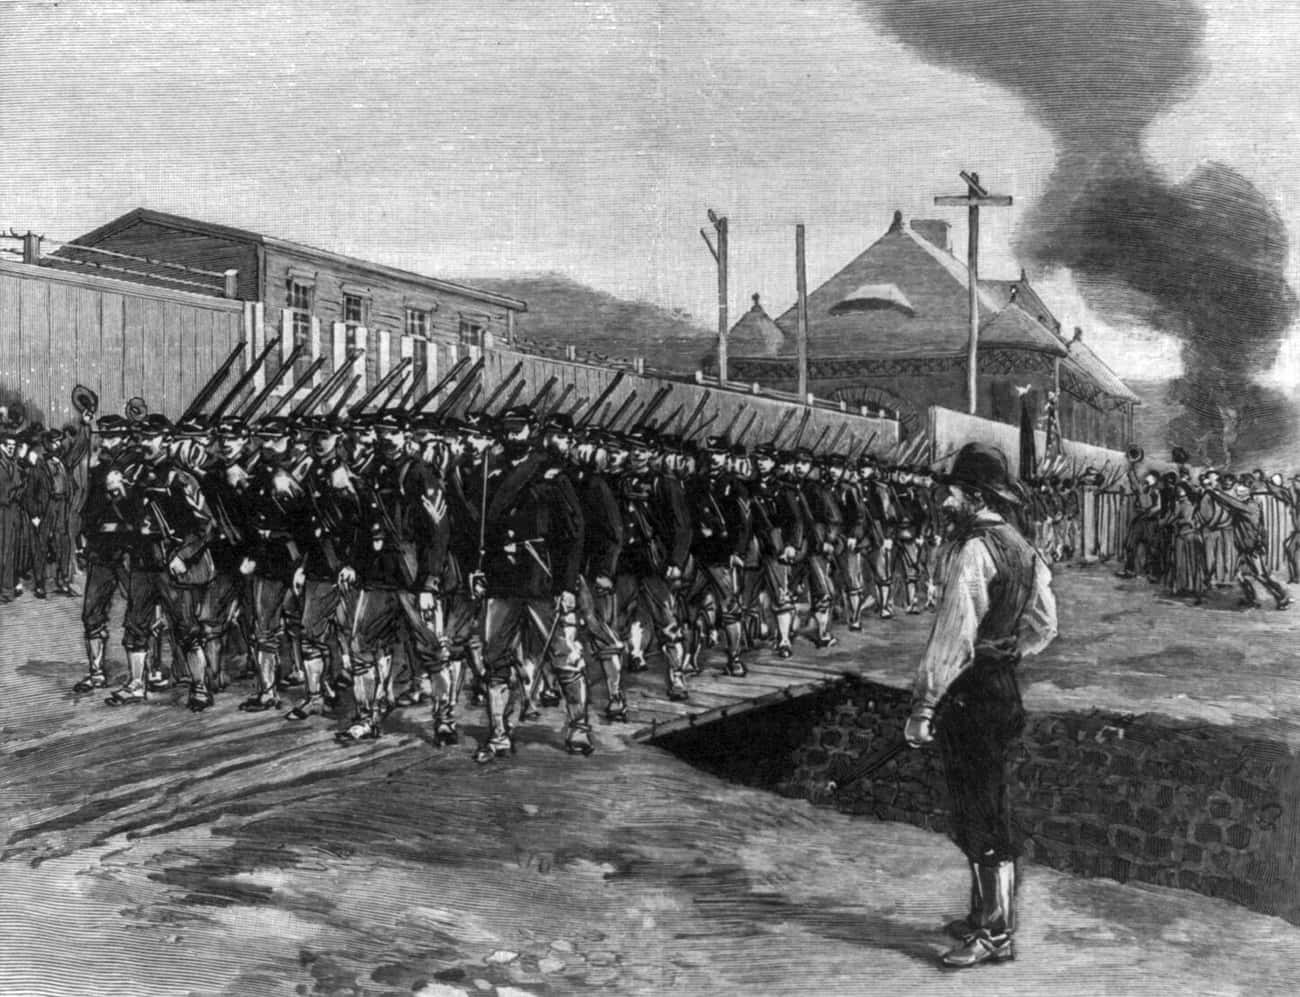 Workers Riots Took A Back Seat To Capitalist Hegemony, As Evidenced By The Homestead Strike